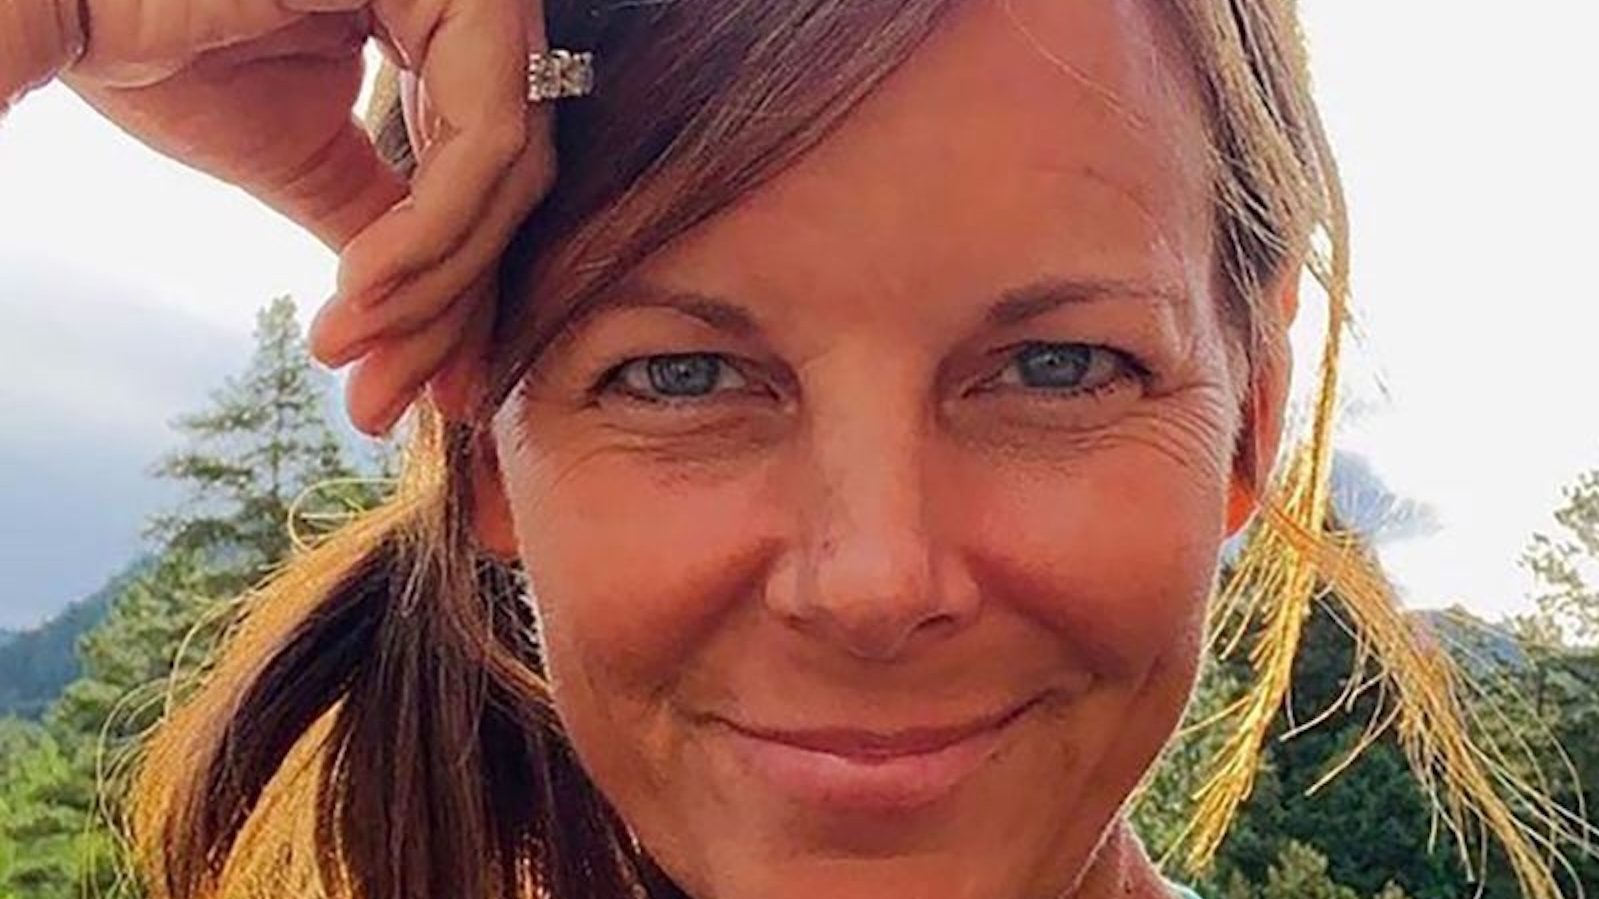 Colorado woman who disappeared during a bike ride died of homicide and had a cocktail of drugs in her system, according to the coroner